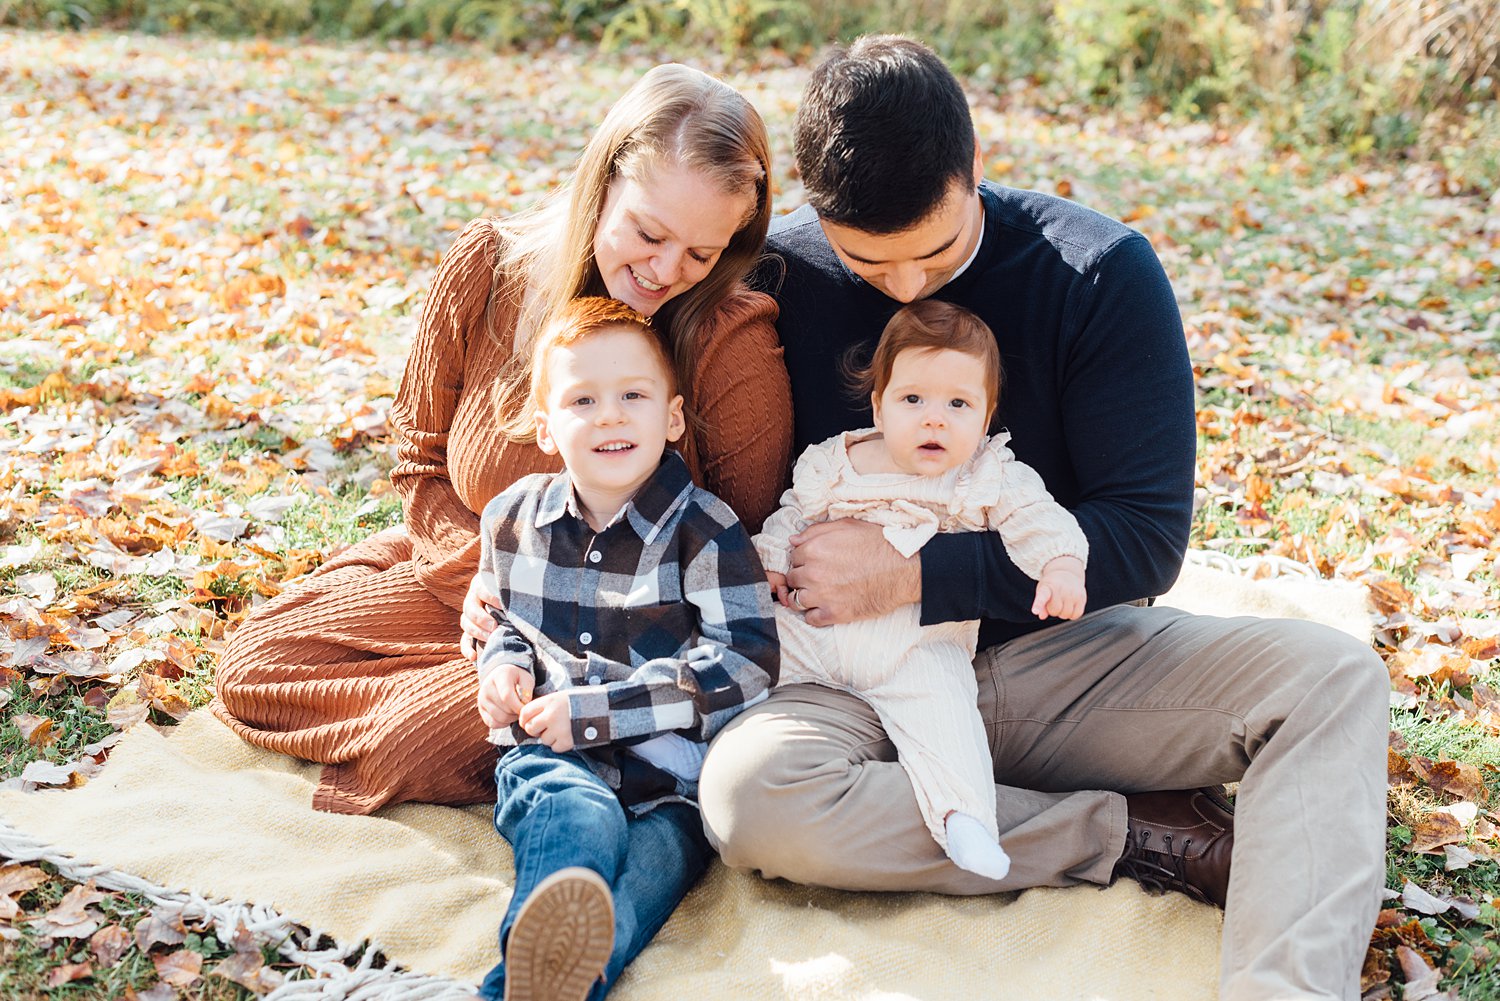 Rockville Mini Sessions - Montgomery County Maryland Family Photographer - Alison Dunn Photography photo